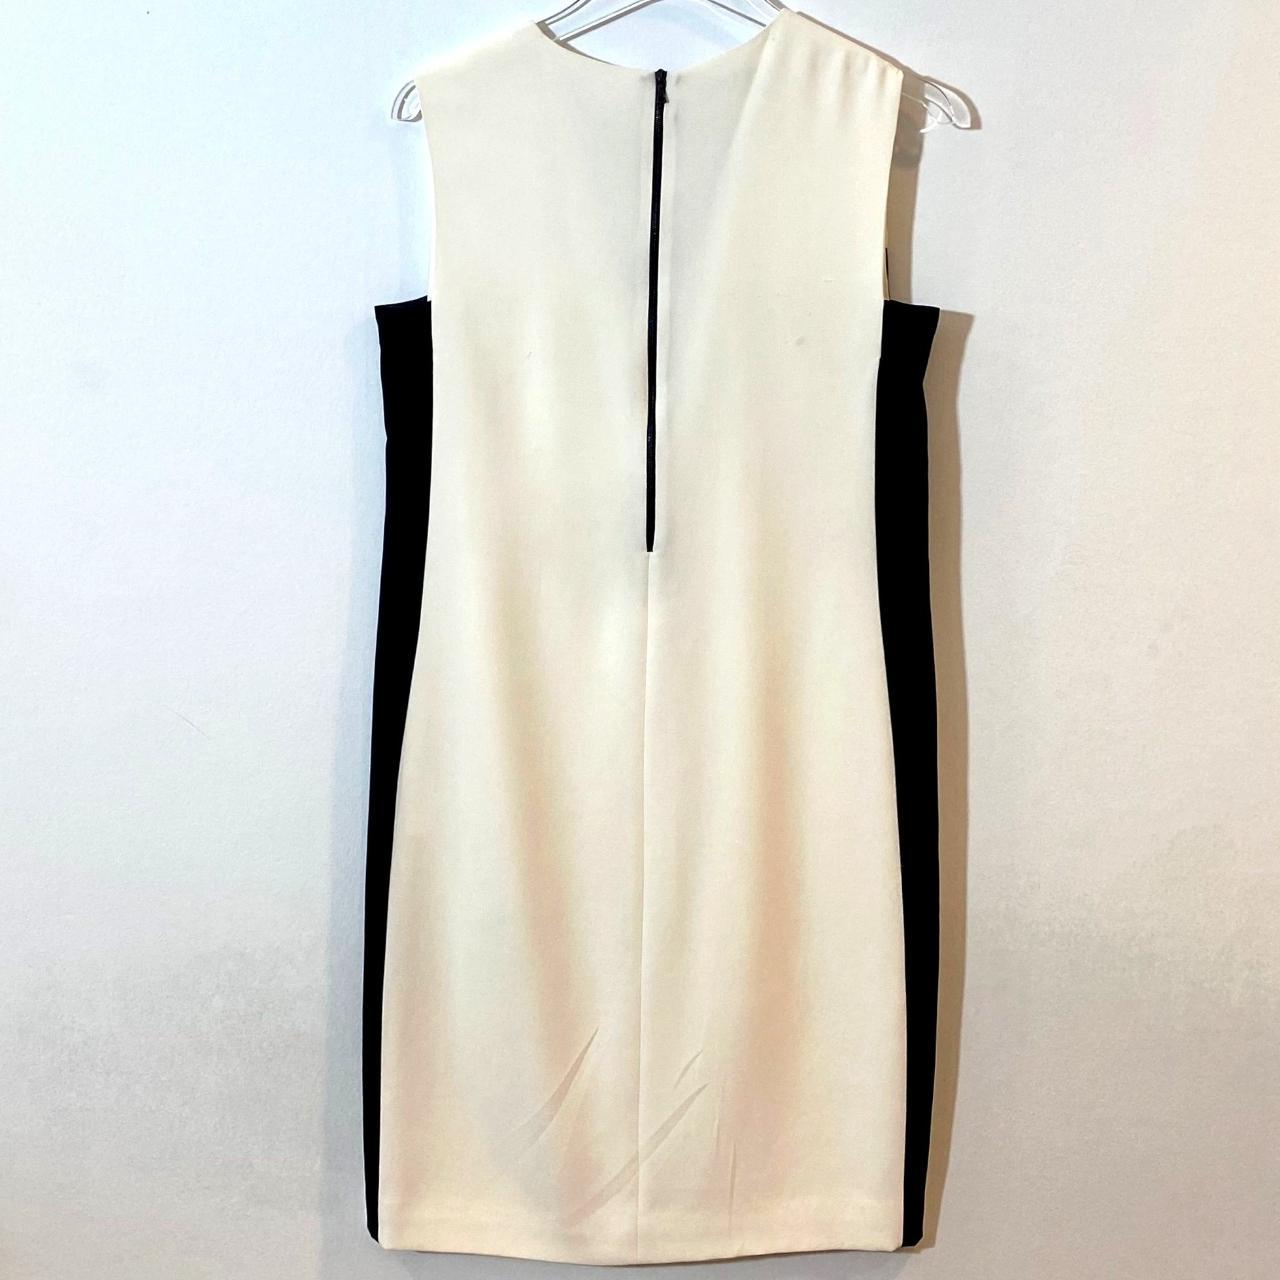 Narciso Rodriguez Women's White and Black Dress (2)